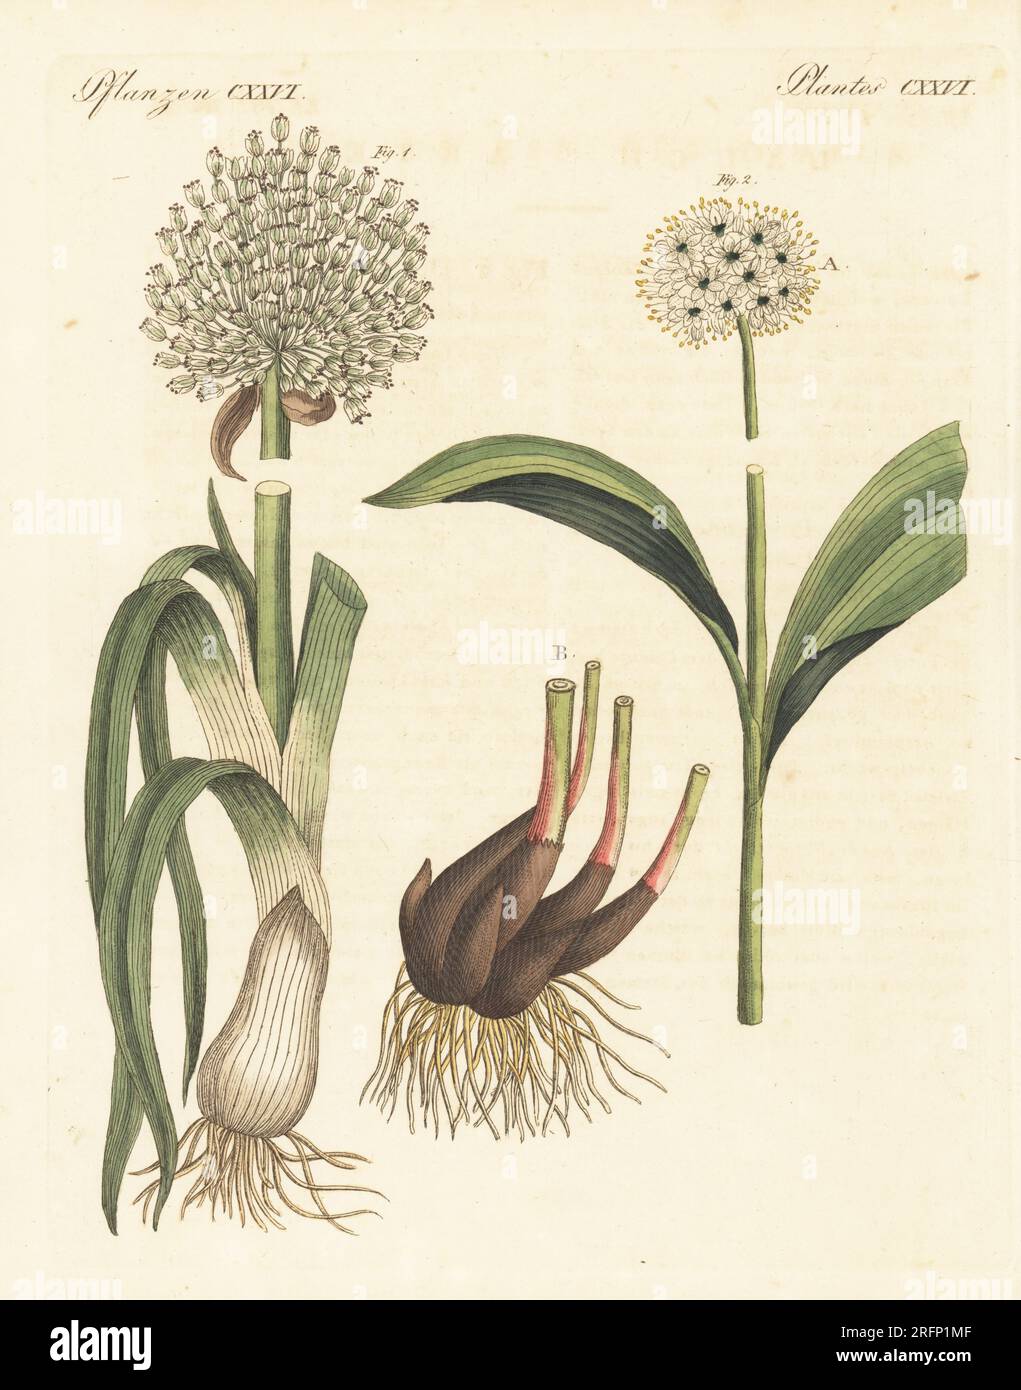 Leek, Allium porrum 1, and alpine leek or victory onion, Allium victorialis 2. The botanicals were drawn by Henriette and Conrad Westermayr, F. Götz and C. Ermer. Handcoloured copperplate engraving from Carl Bertuch's Bilderbuch fur Kinder (Picture Book for Children), Weimar, 1810. A 12-volume encyclopedia for children illustrated with almost 1,200 engraved plates on natural history, science, costume, mythology, etc., published from 1790-1830. Stock Photo